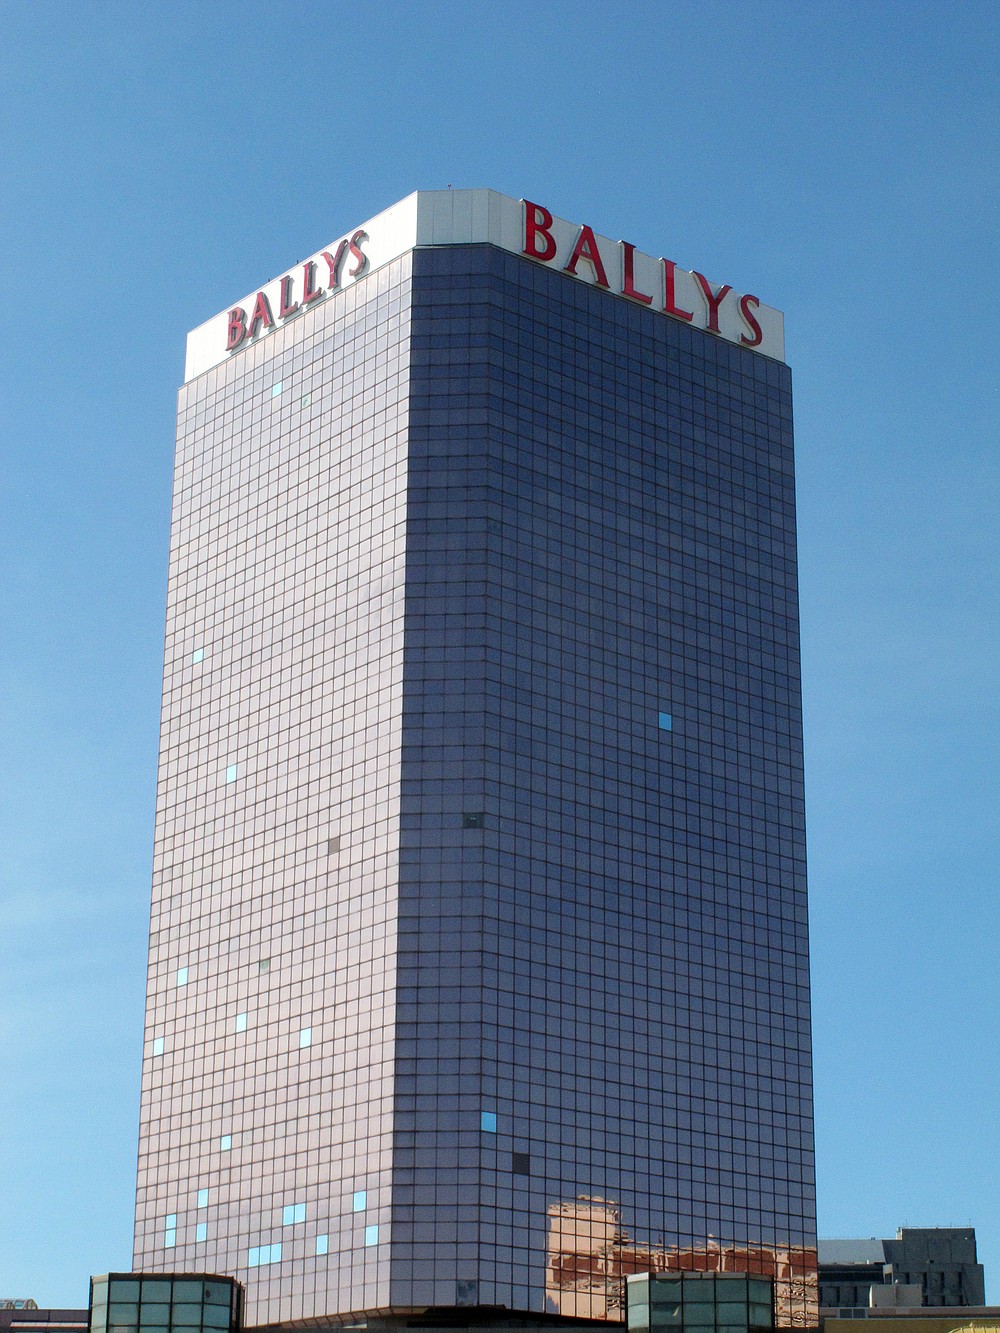 This Oct. 1, 2020, photo shows the exterior of Bally's casino in Atlantic City, N.J. On Nov. 4, 2020, officials with Twin River Worldwide Holdings, a Rhode Island firm that's buying Bally's for $25 million, said they can make it "a place to see and be seen" by investing $90 million into the aging casino and boosting its offerings. (AP Photo/Wayne Parry)